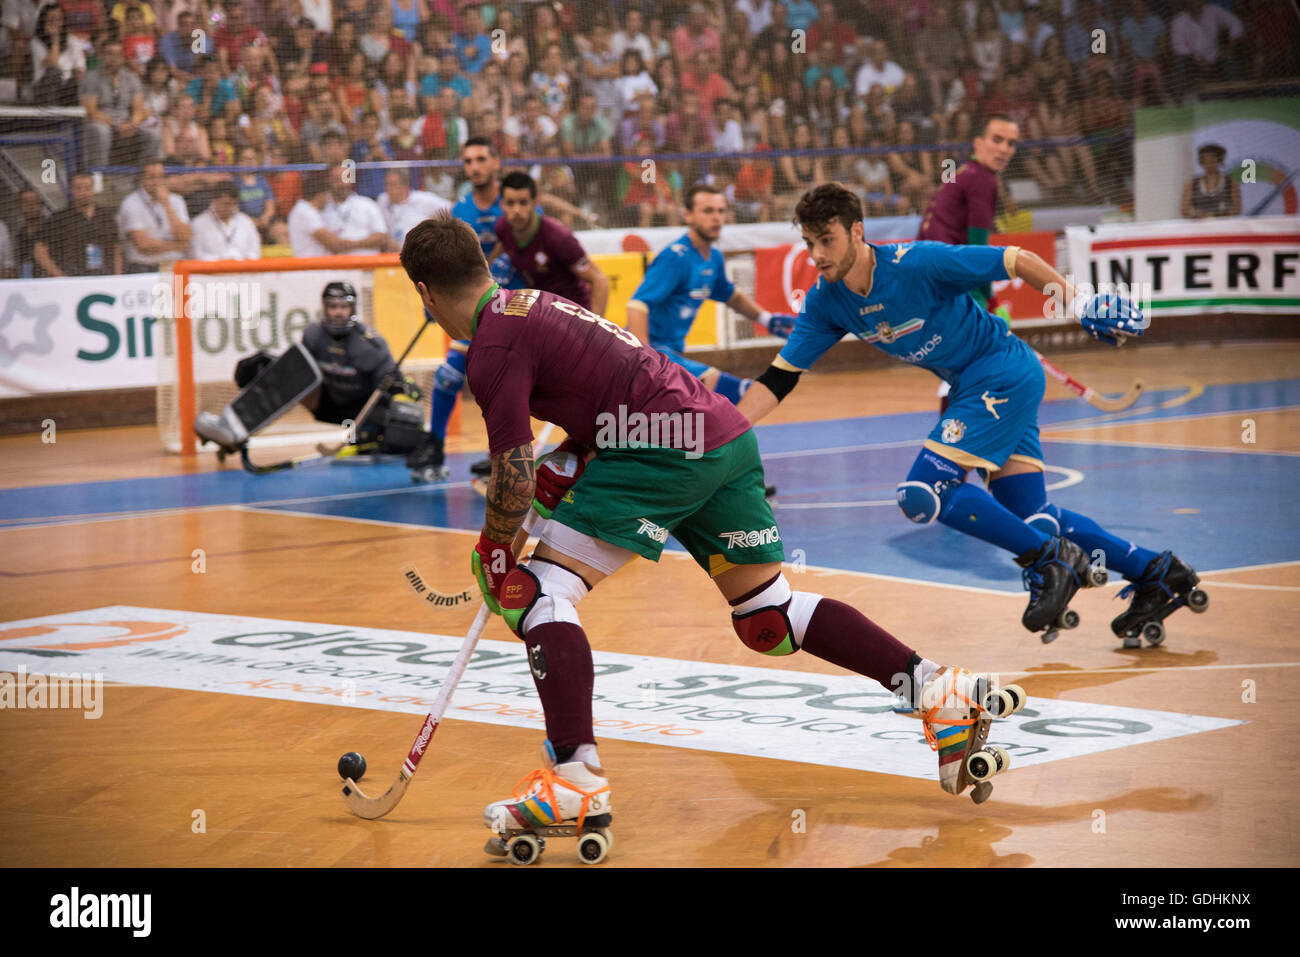 Portugal plays Italy in the finals of the CERH European Roller Hockey Championship tournament in Oliveira de Azemeis, Portugal. Stock Photo